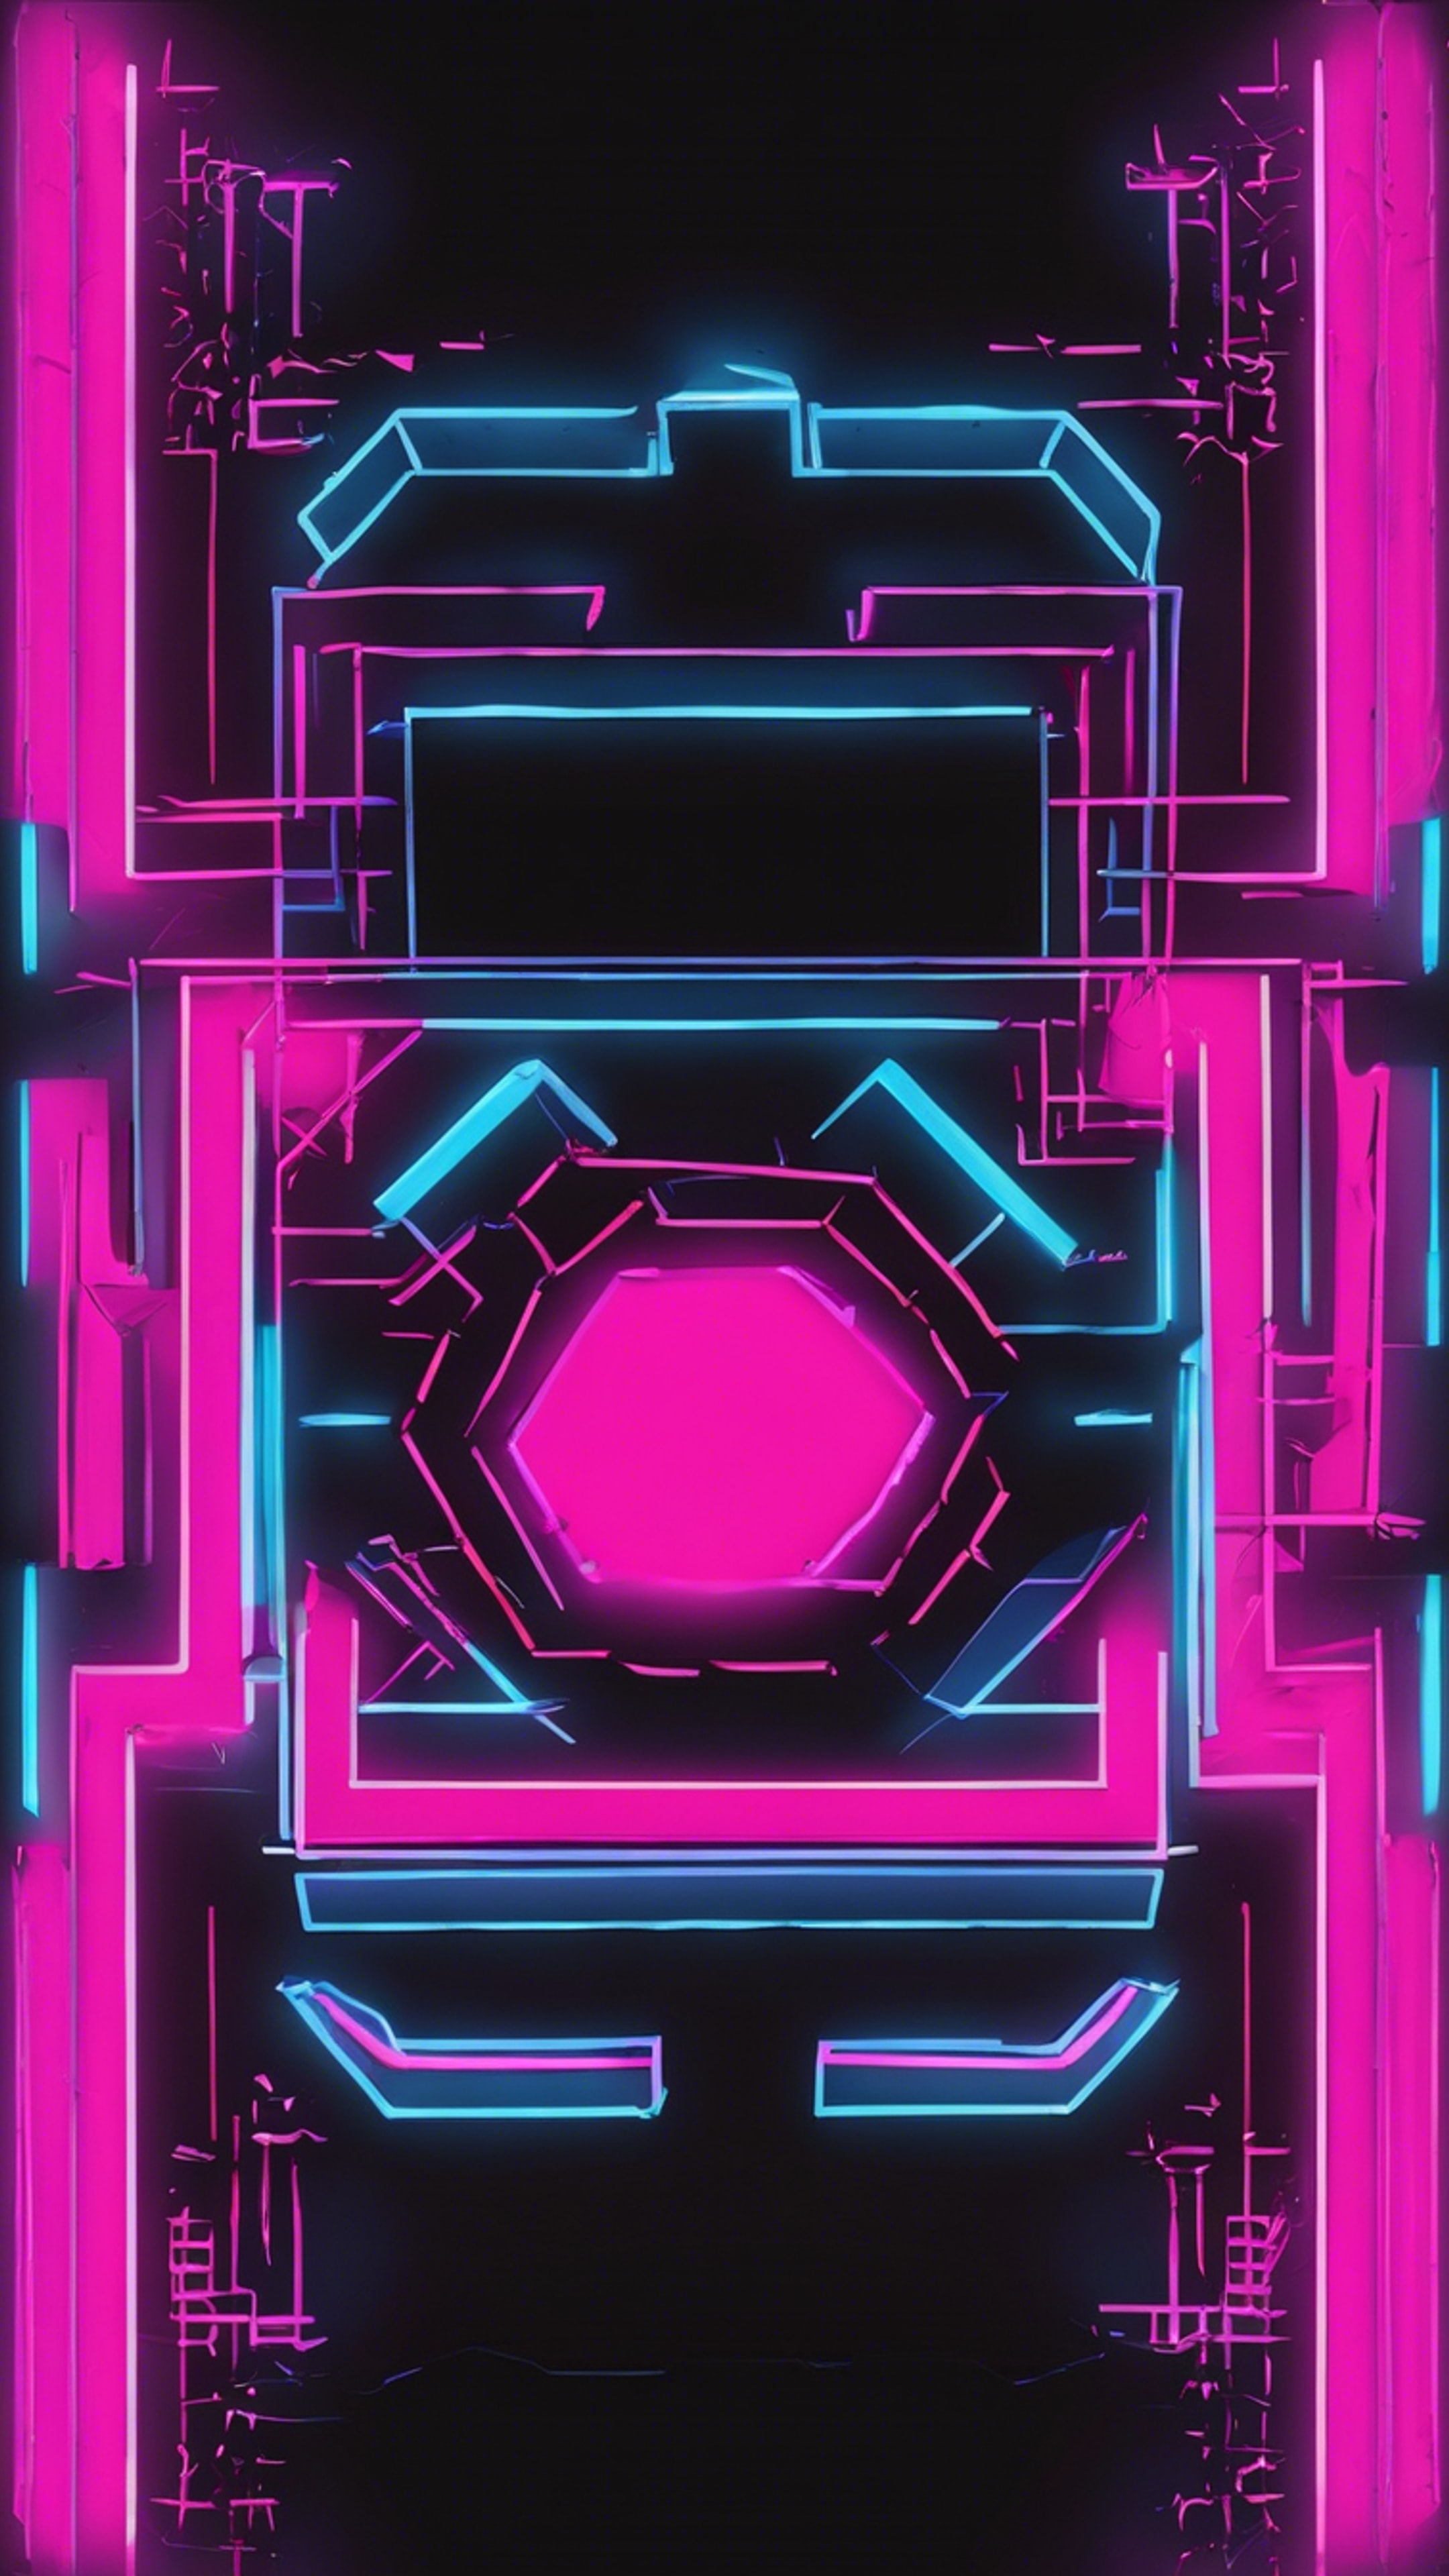 Bright neon pink and blue geometric shapes against a black background, reminiscent of 80s arcade games. Ταπετσαρία[dd42a0f55e3e425295c8]